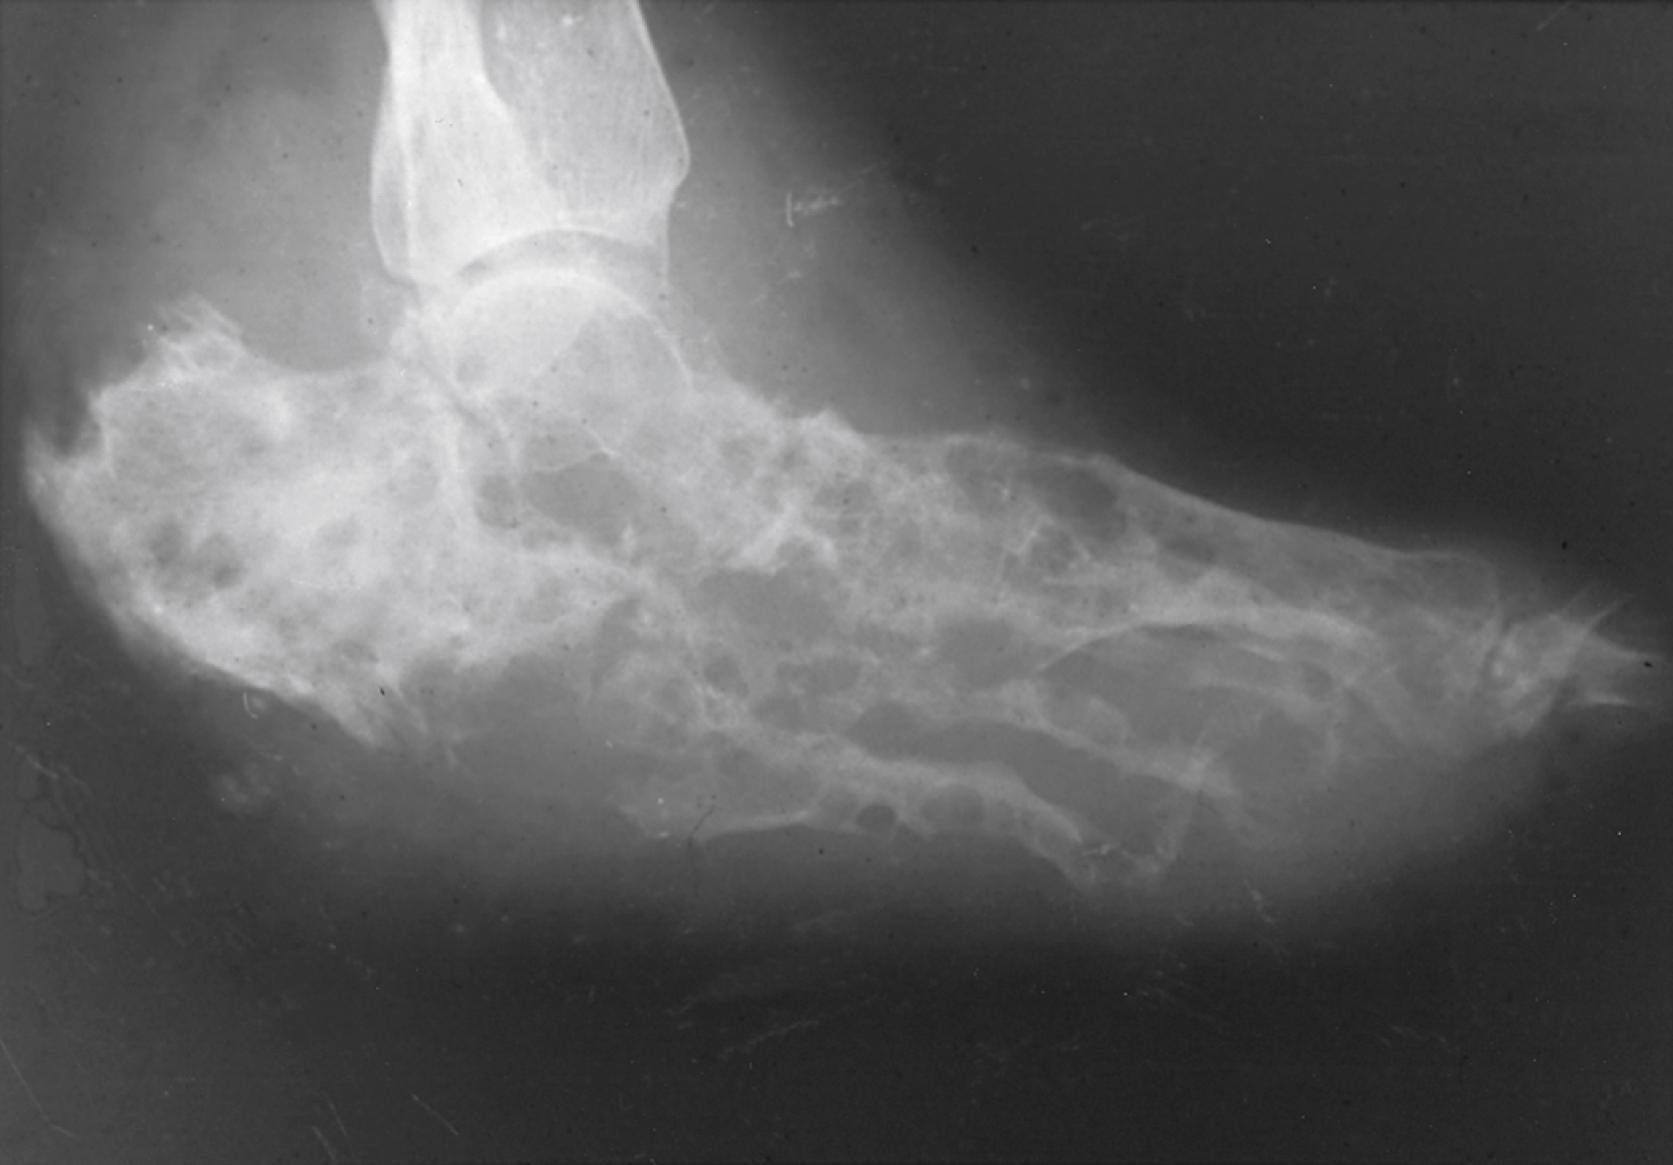 Figure 255.1, Radiograph of the foot of a 43-year-old farm worker with an 8-year history of foot swelling and fistulous drainage of suppurative material. Madurella mycetomatis was isolated from exuded granules. The radiograph shows extensive destruction of all bones of the foot with characteristic multiple lytic cavities and almost complete loss of normal bony architecture.